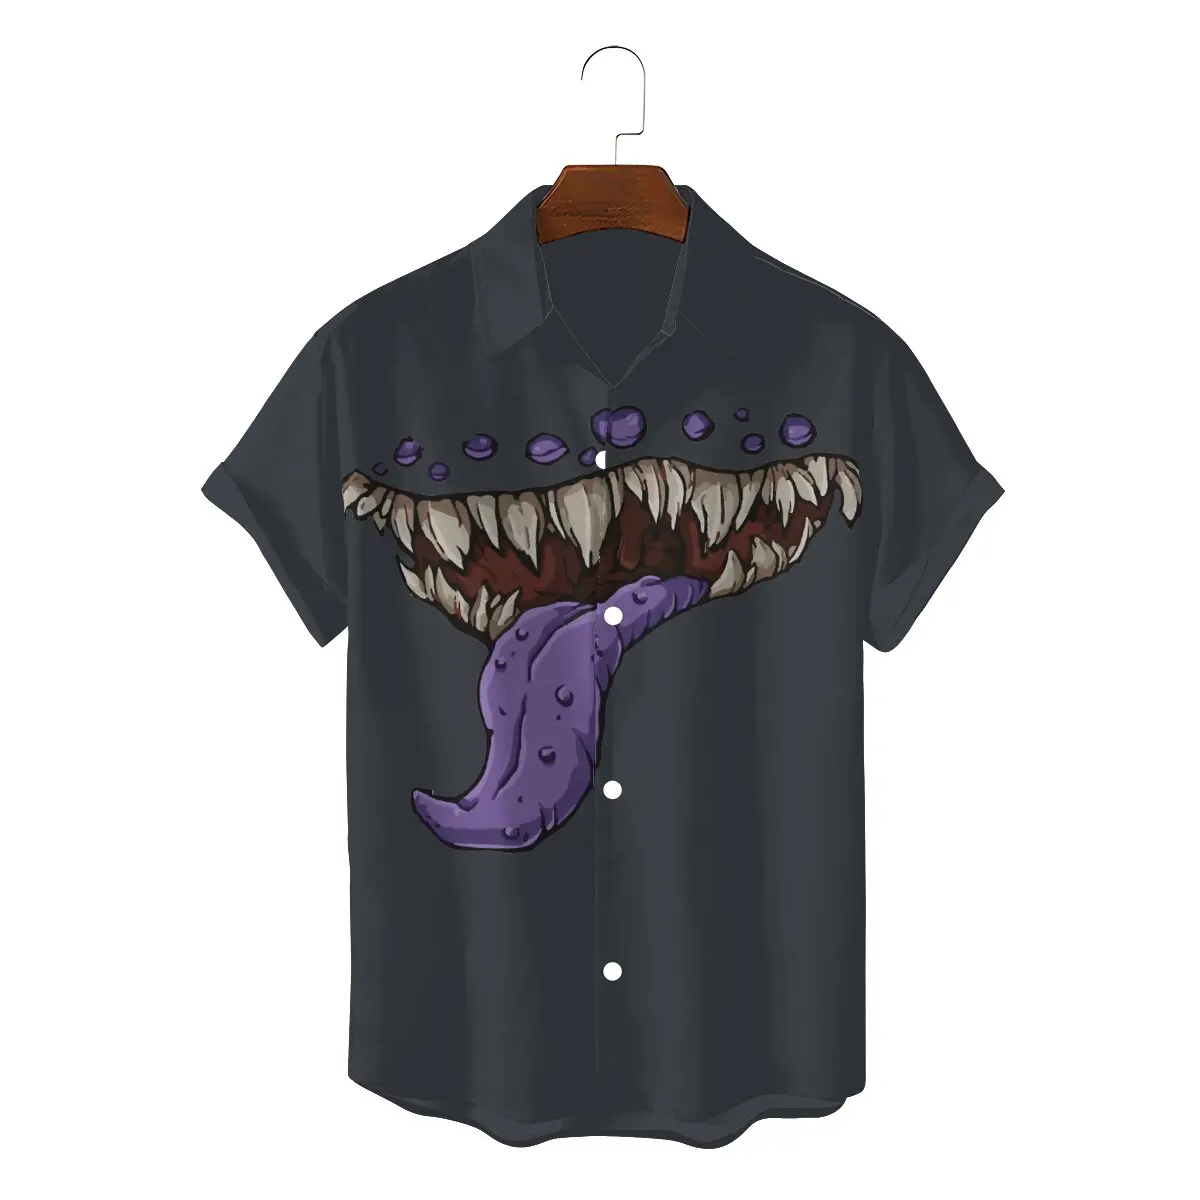 

Mimic Mouth Unique 3D Shirt DnD Game Leisure Hawaii Shirts Summer Stuff For Adult